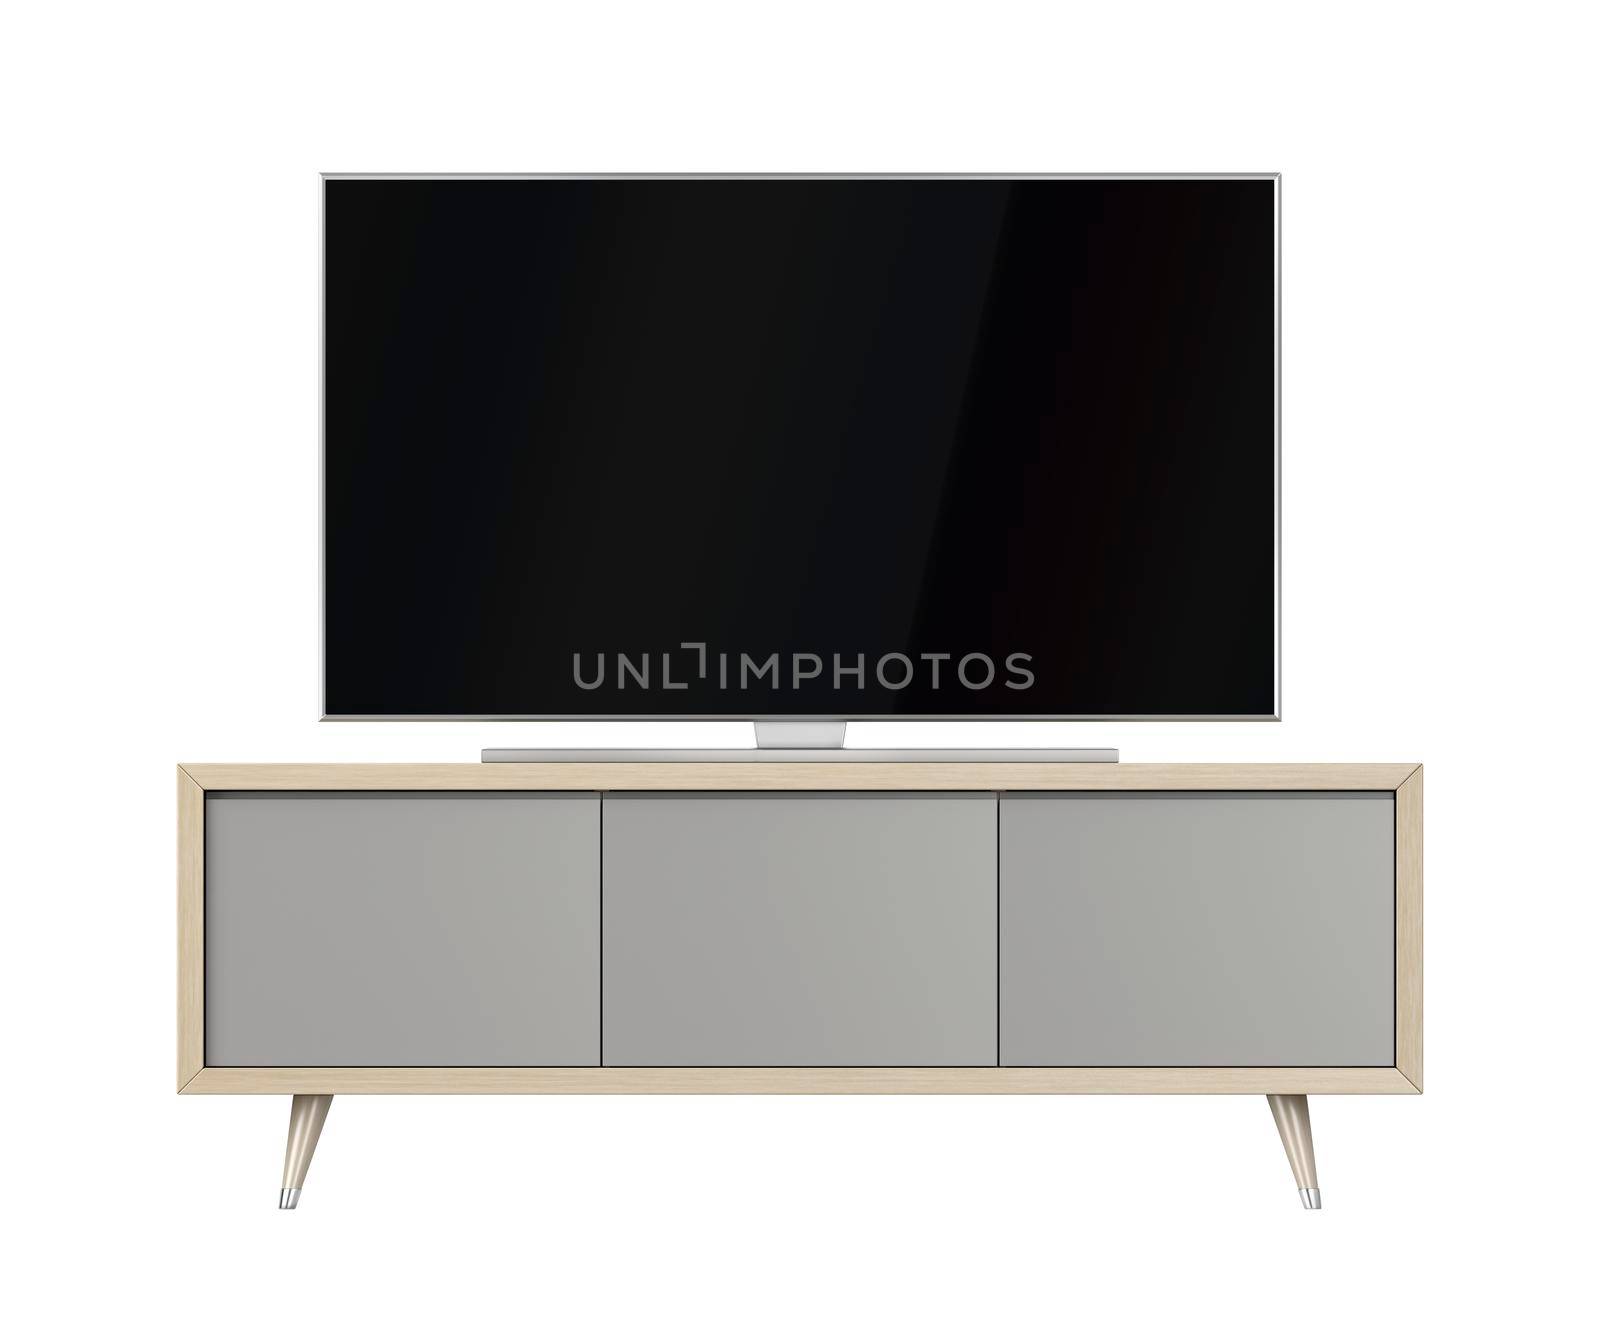 Modern tv cabinet and big tv with blank screen, isolated on white background